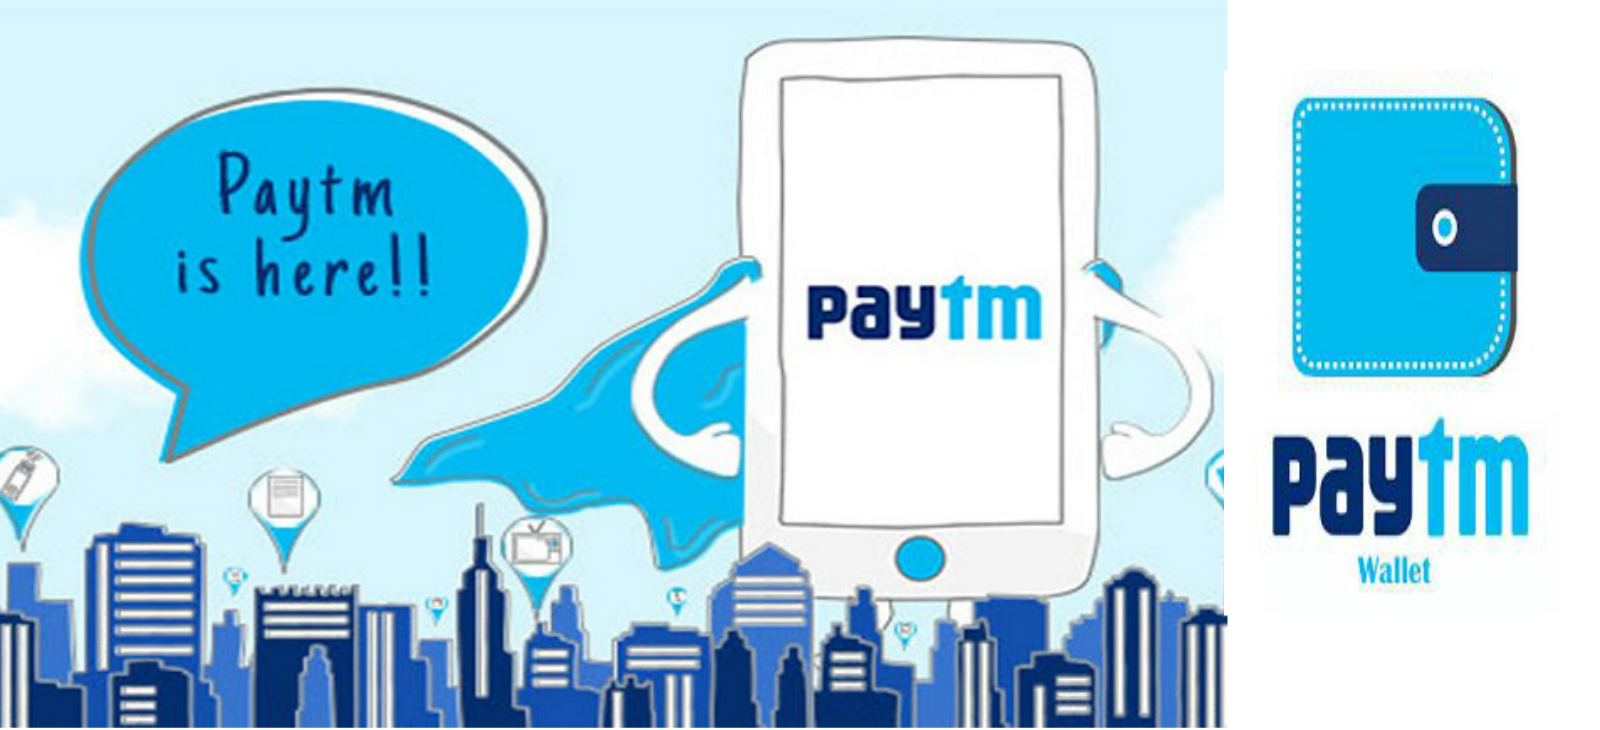 Paytm Offer Foreign Exchange Services And Remittance Soon,Startup Stories,2018 Latest Business News,Startup News India,Paytm New Offers,Paytm Launch Foreign Exchange Services,India Largest Digital Payments Platform,Paytm Foreign Exchange Services,Paytm Business News